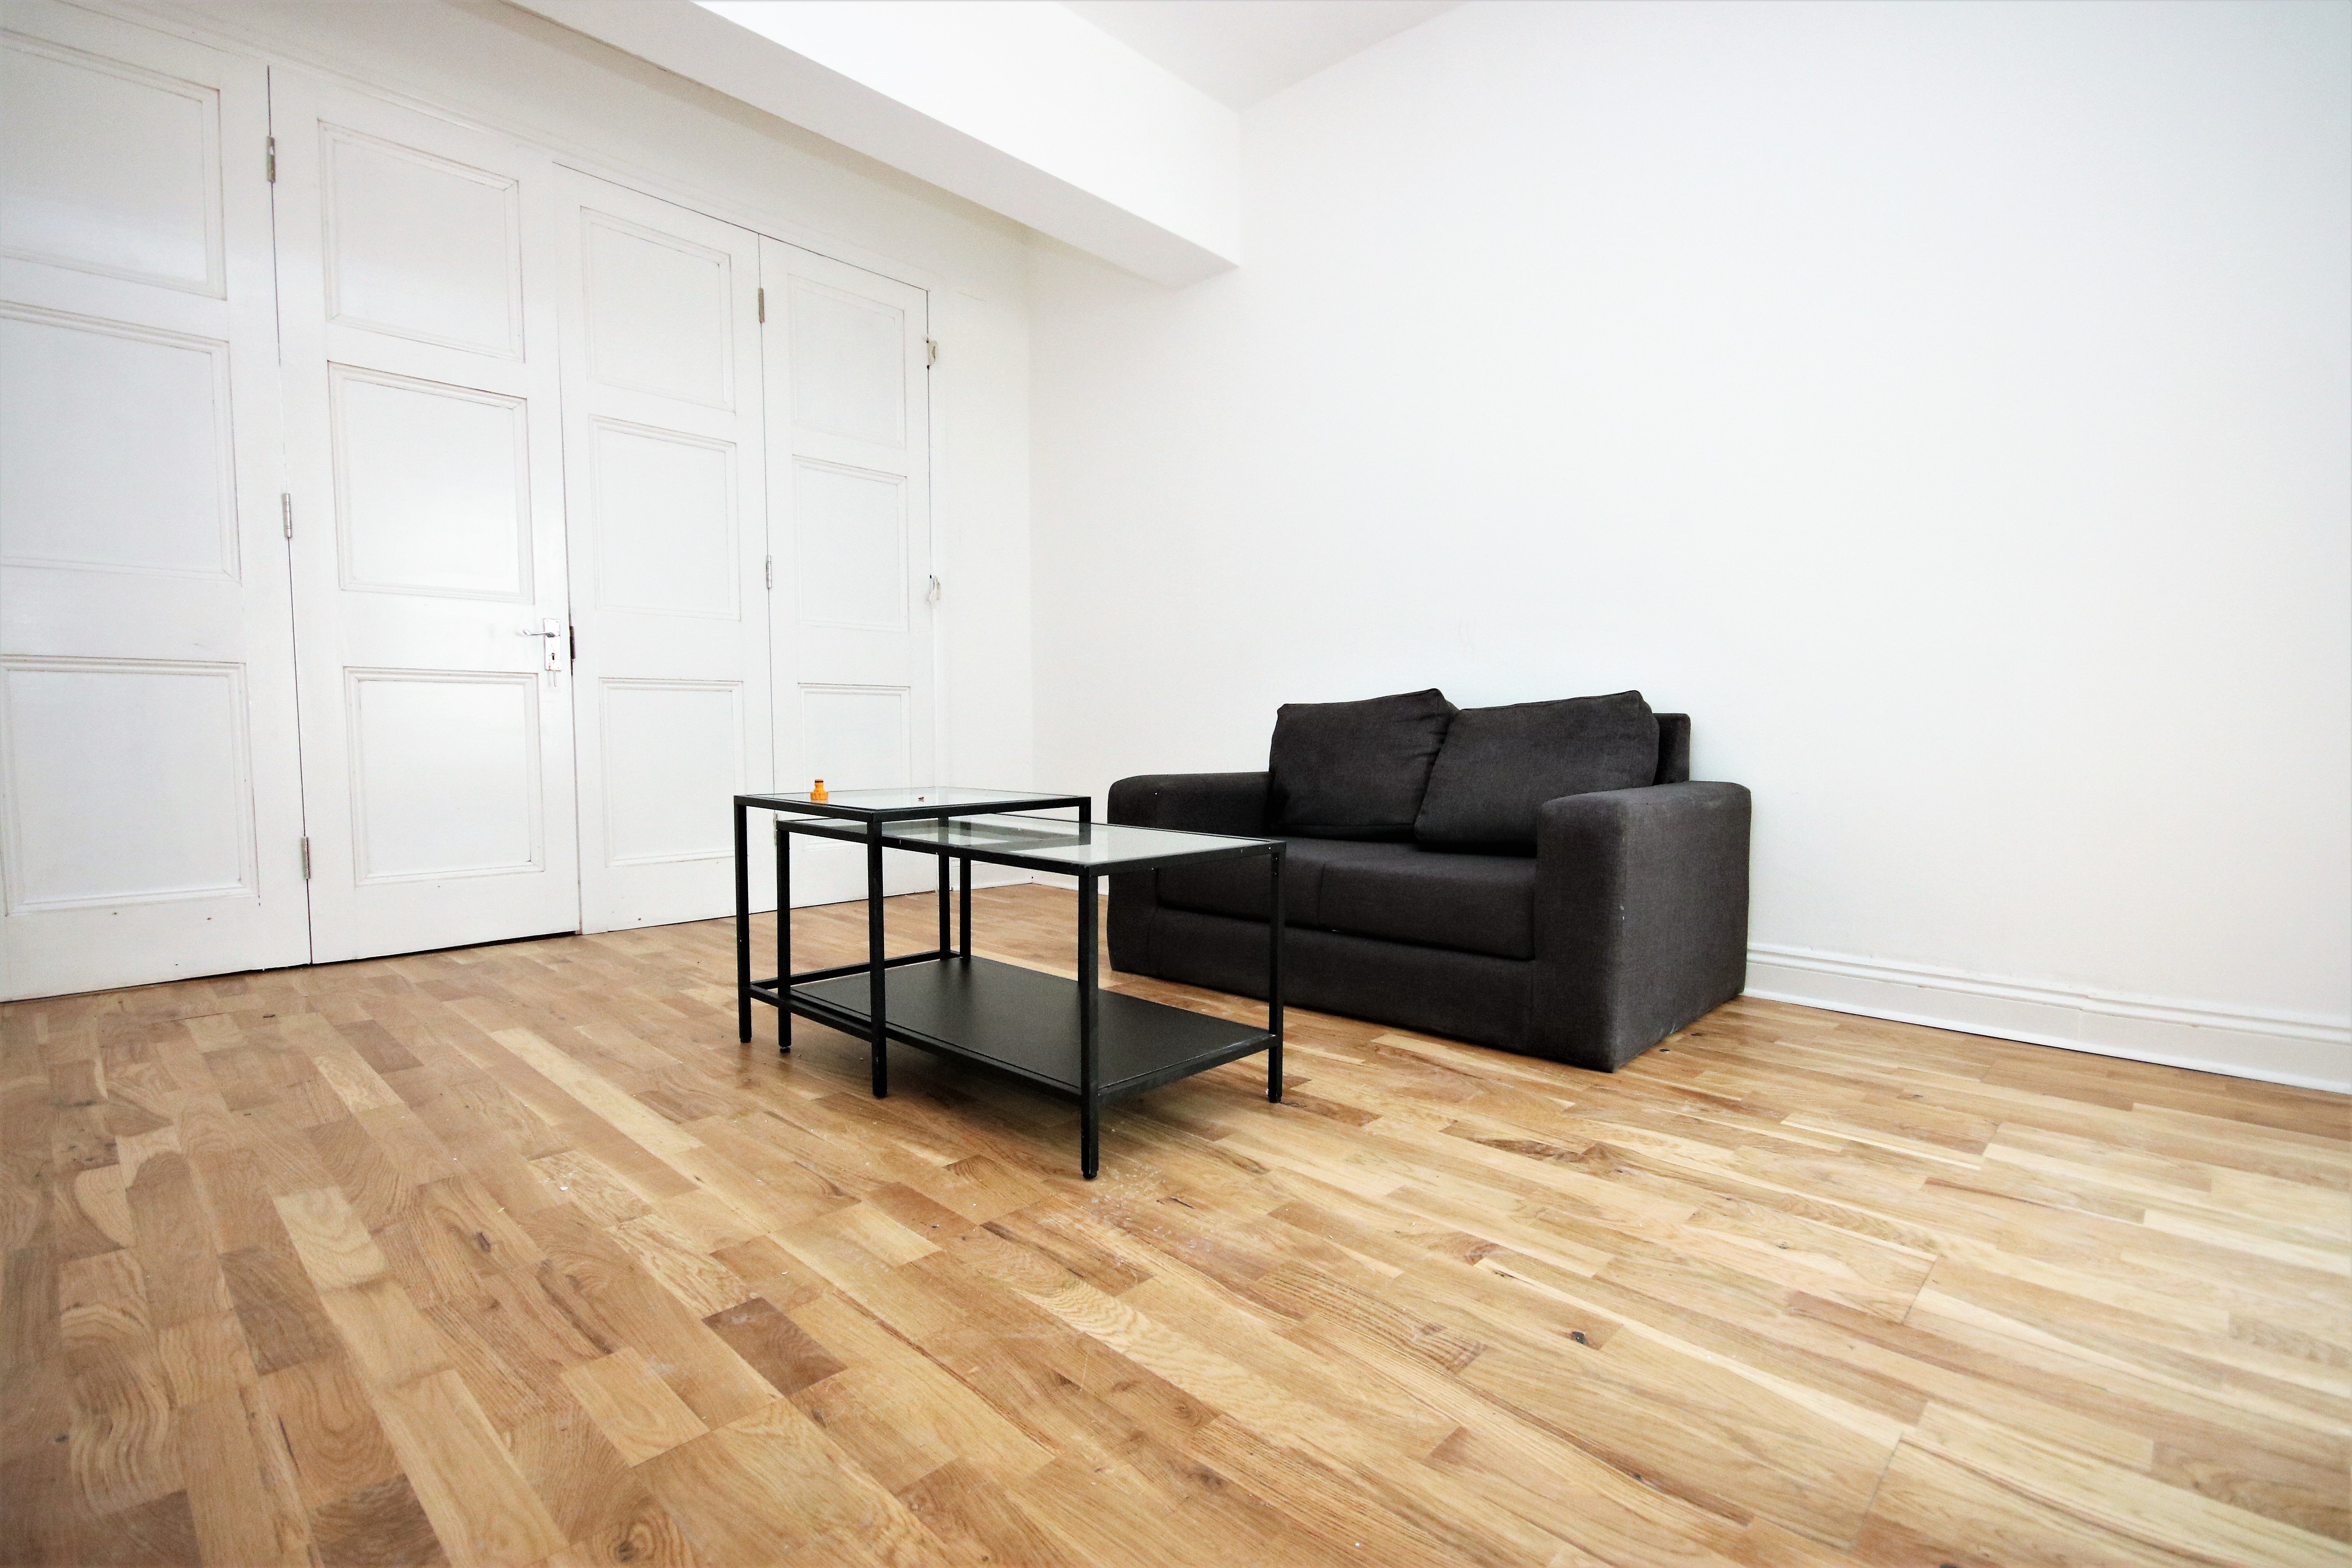 4 bed Flat for rent in Tottenham. From Living Space